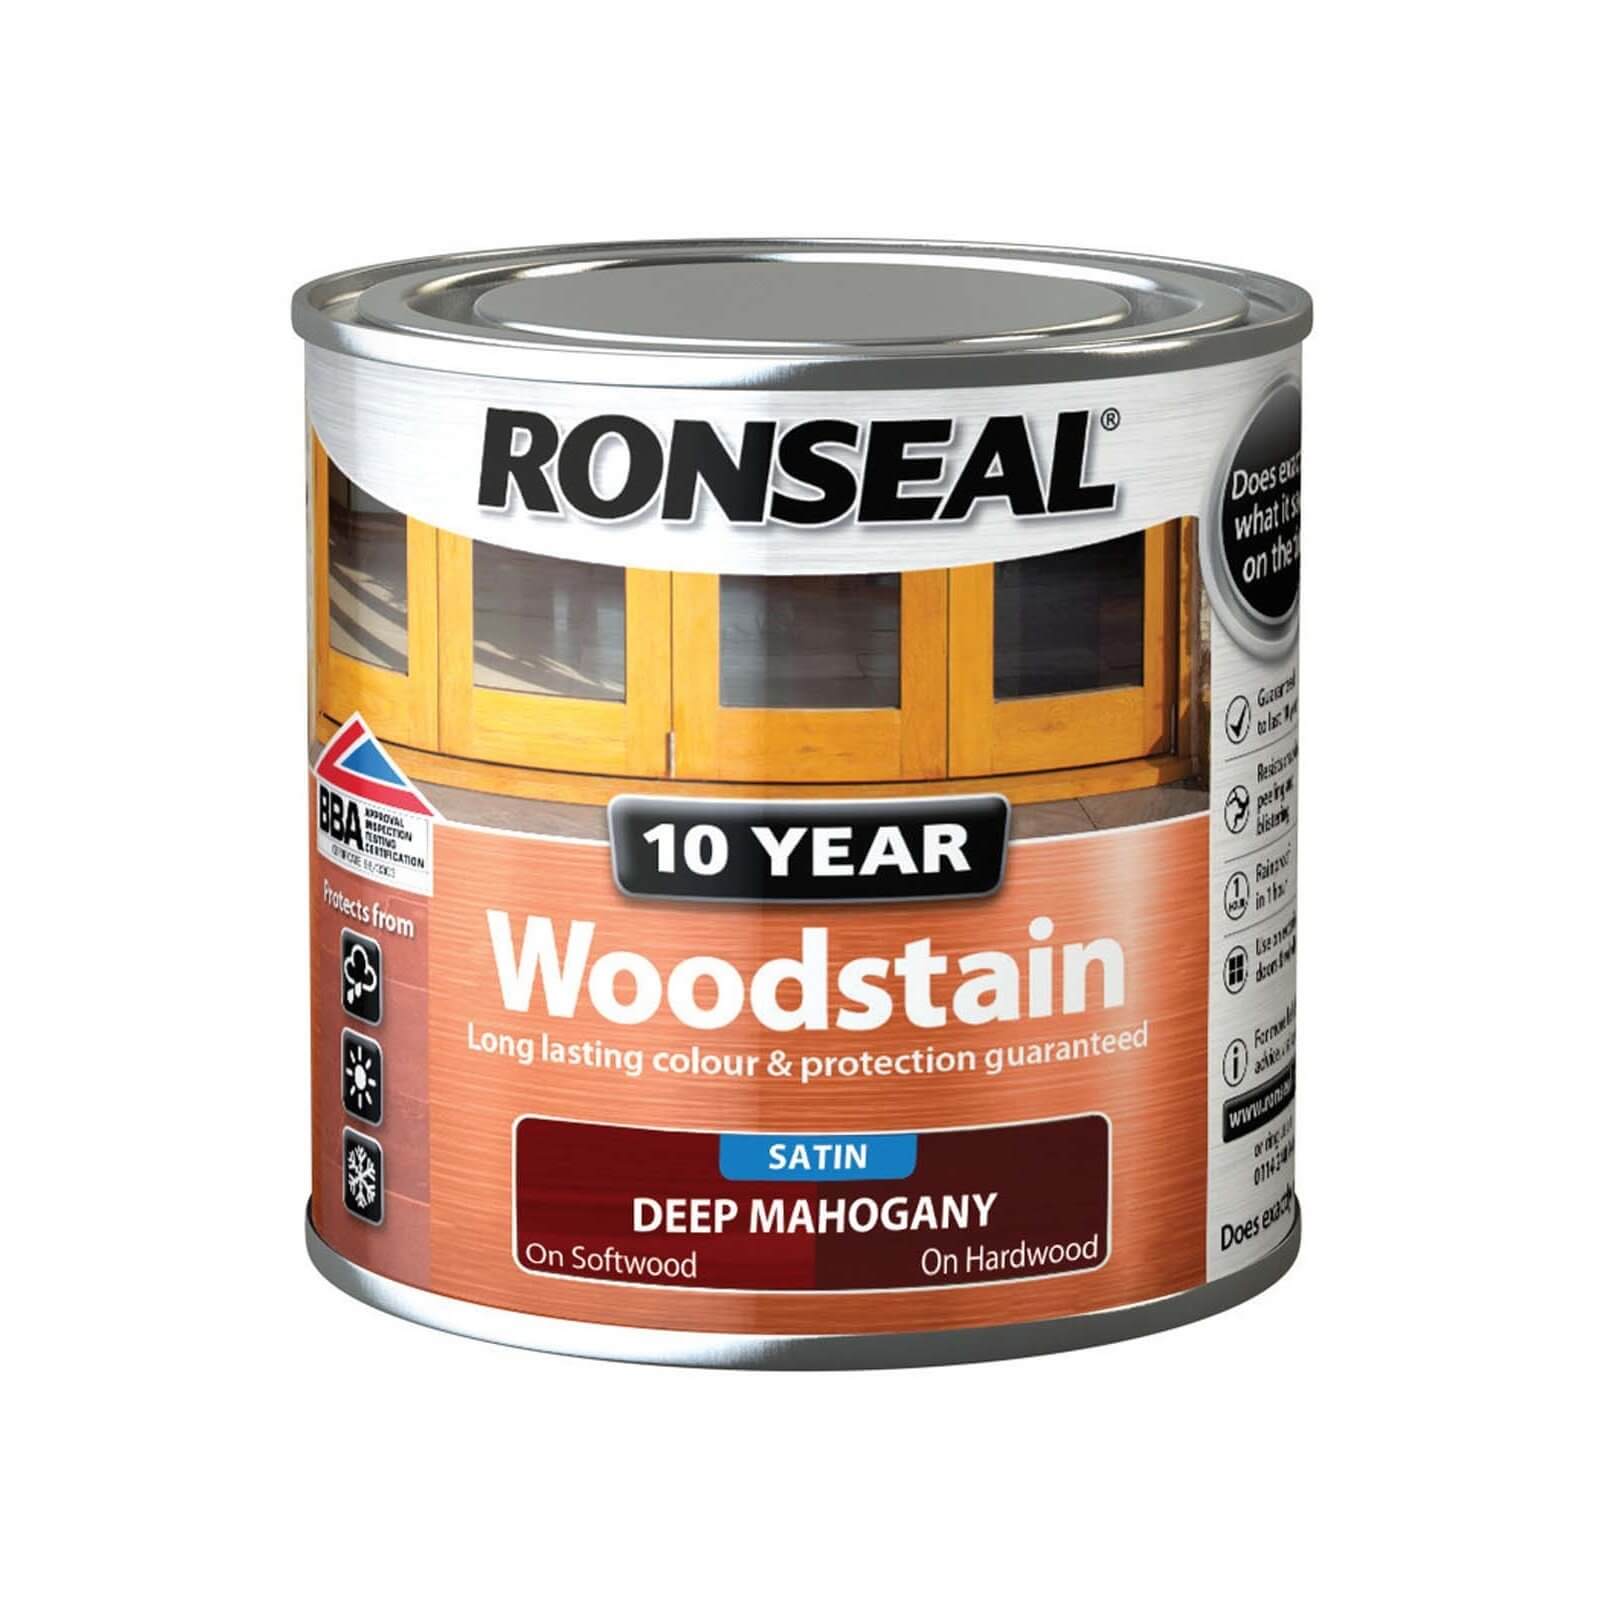 Ronseal 10 Year Woodstain Deep Mahogany Stain - 250ml